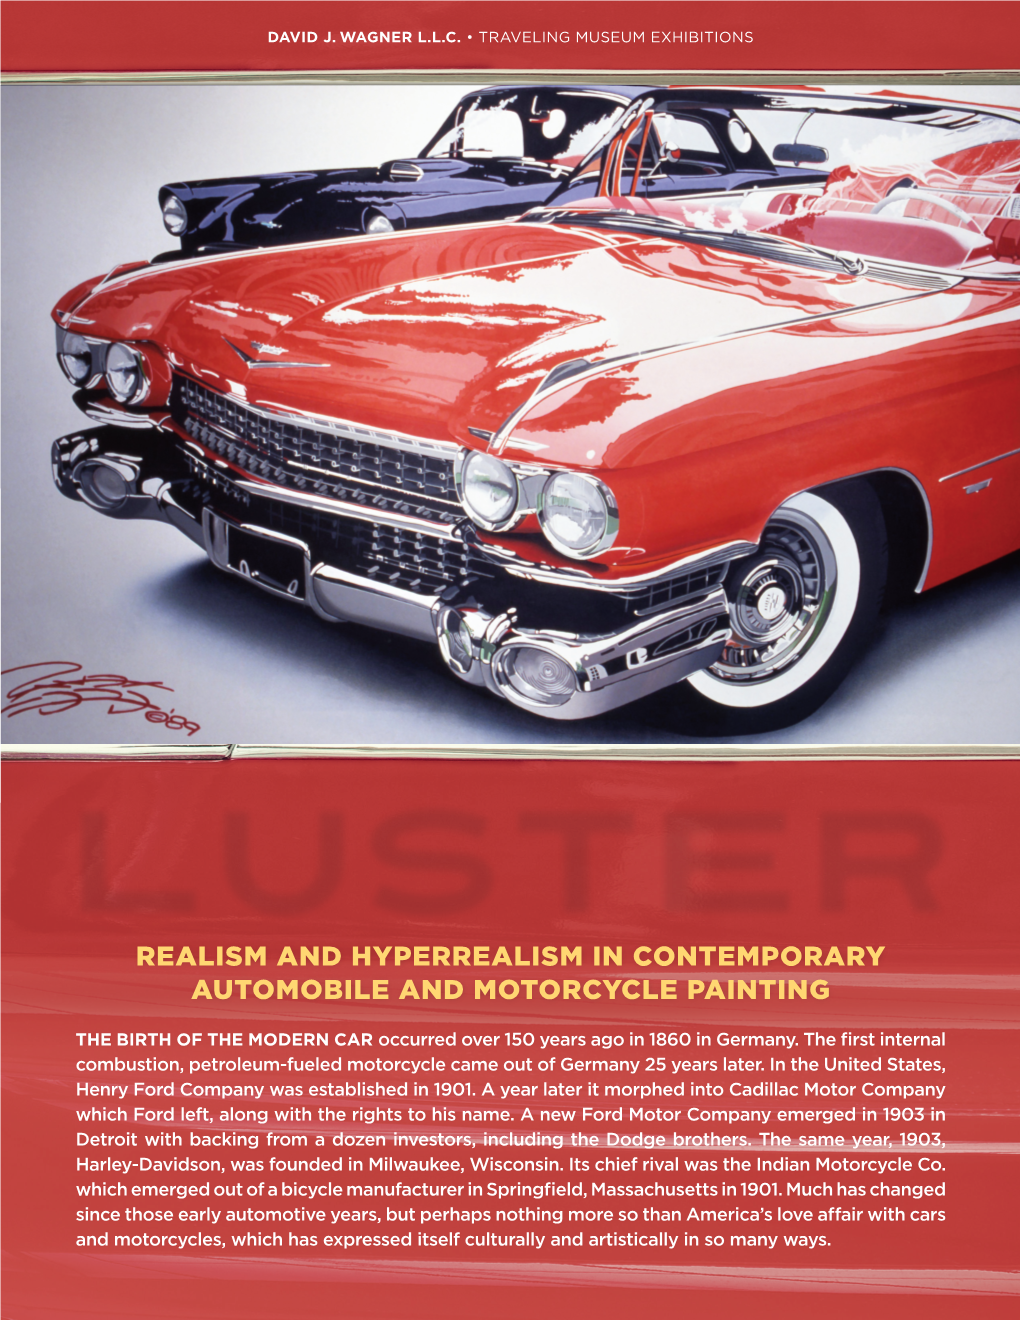 LUSTER: Realism and Hyperrealism in Contemporary Automobile And